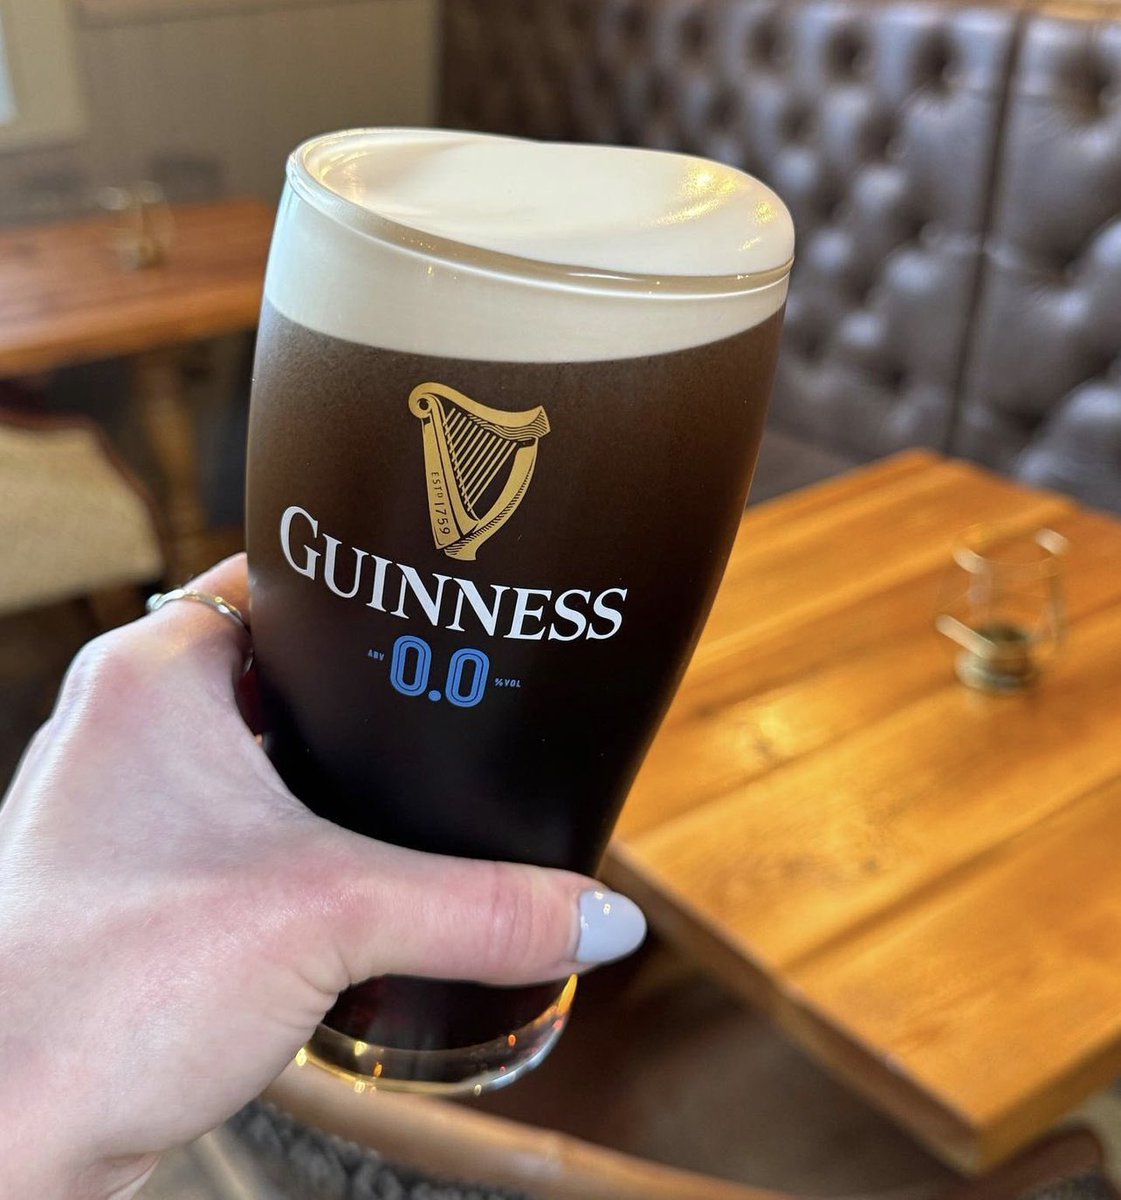 Thoughts on Guinness Zero?